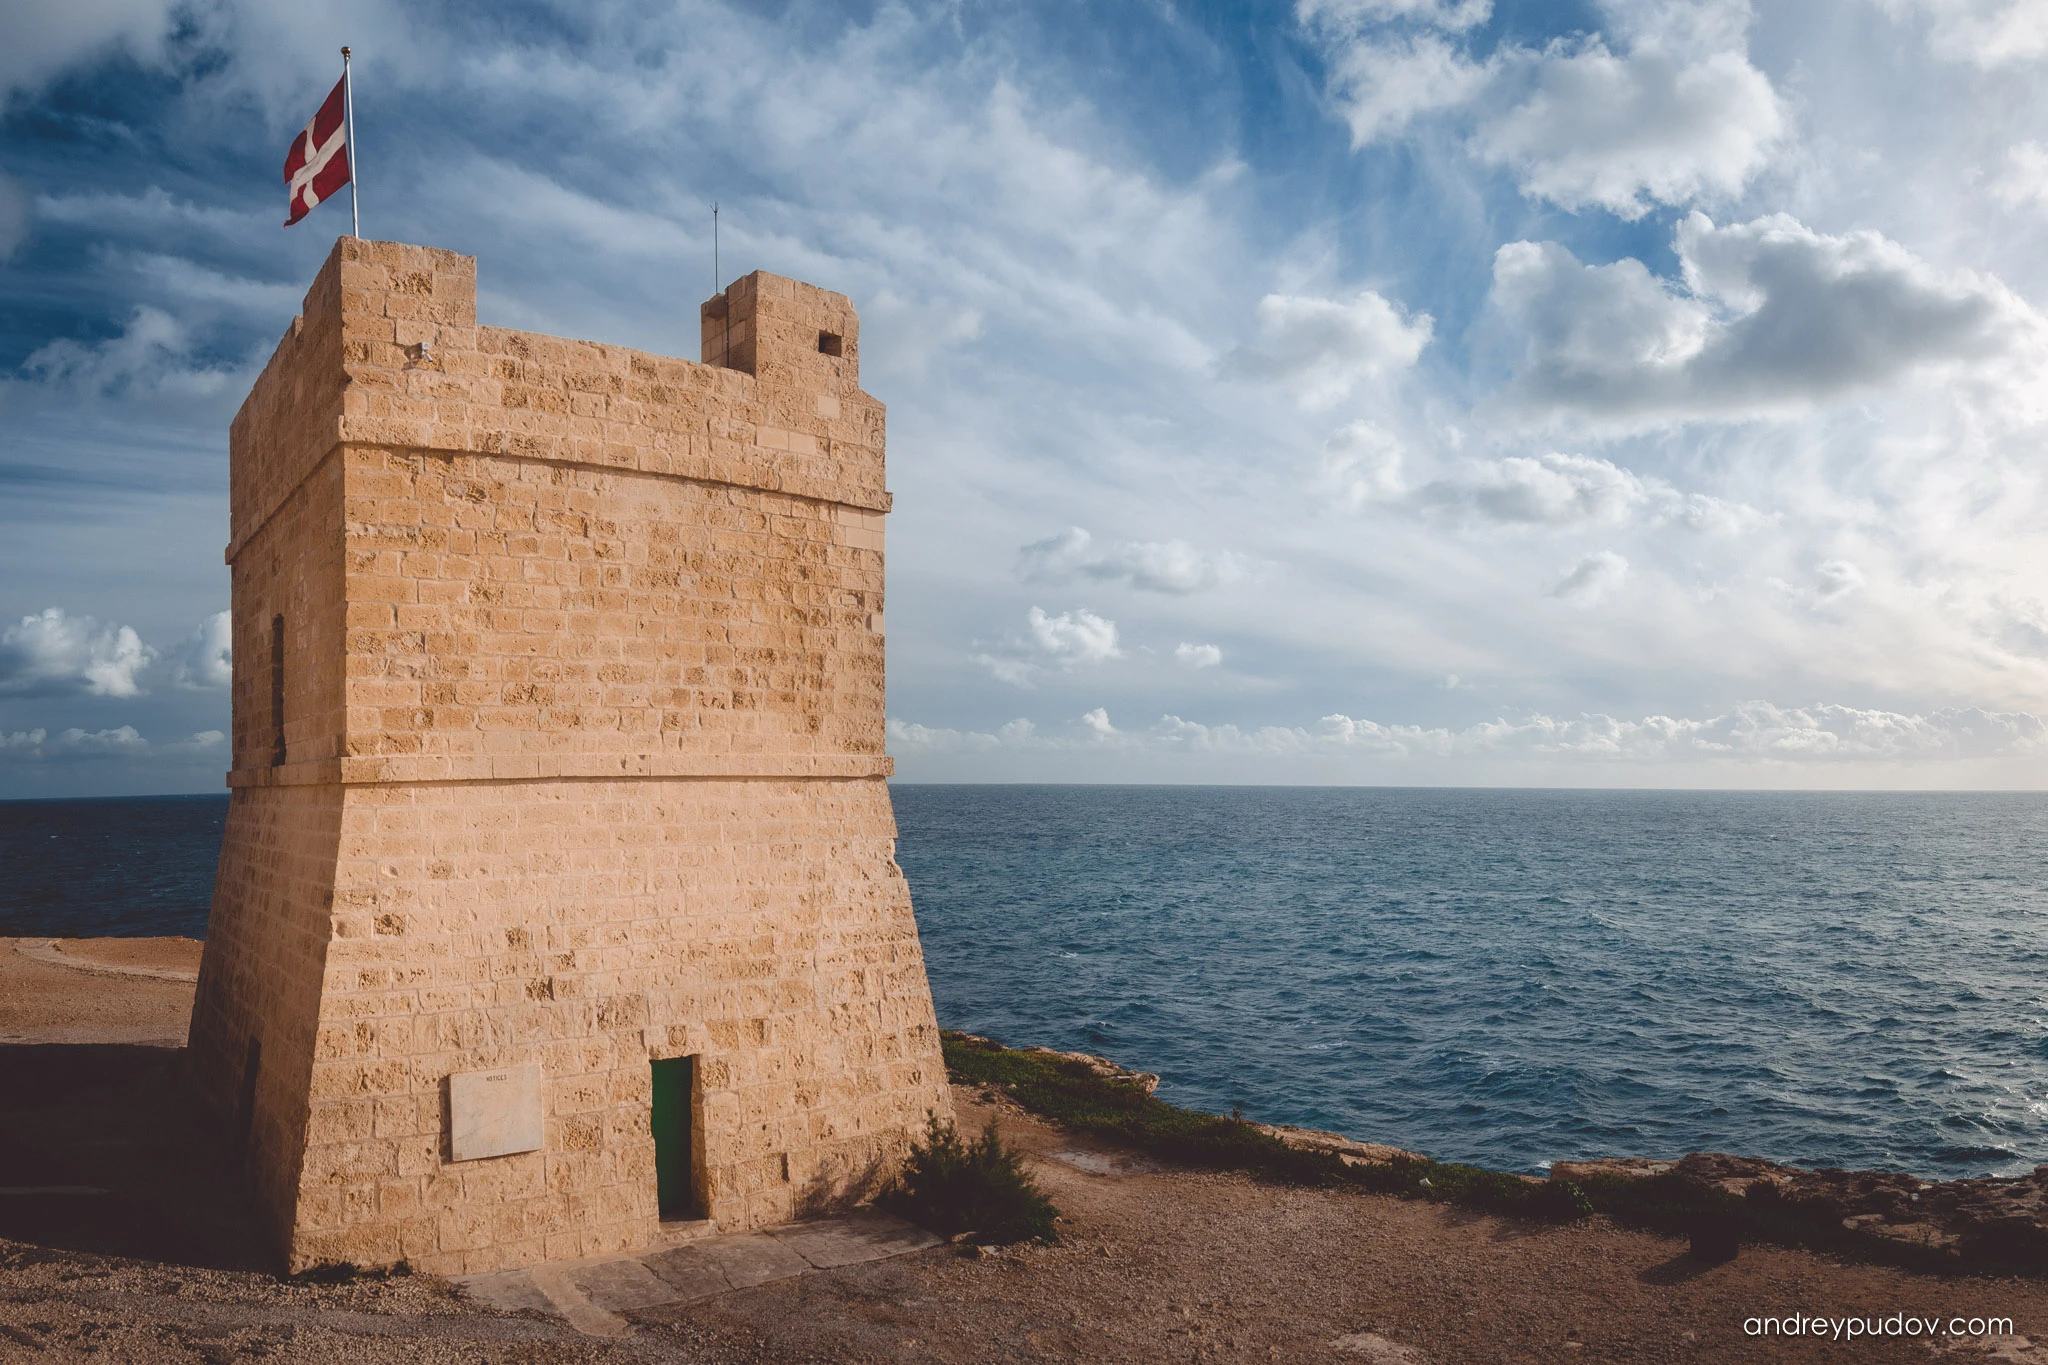 Sciuta Tower

Sciutu Tower was built in 1637–1638 in Wied iż-Żurrieq, located within the Qrendi boundaries, on the site of a medieval watch post. It served as the prototype for the De Redin towers, which were built between 1658 and 1659.

After the British took over Malta in 1800, Sciutu Tower remained in use and was manned by the Royal Malta Fencible Regiment and later the Royal Malta Fencible Artillery. It was abandoned in 1873 but was manned by the Coast Police once again during World War II. The tower subsequently used as a police station until 2002. An original cannon dating back to the Order's rule can still be found on the tower's roof.